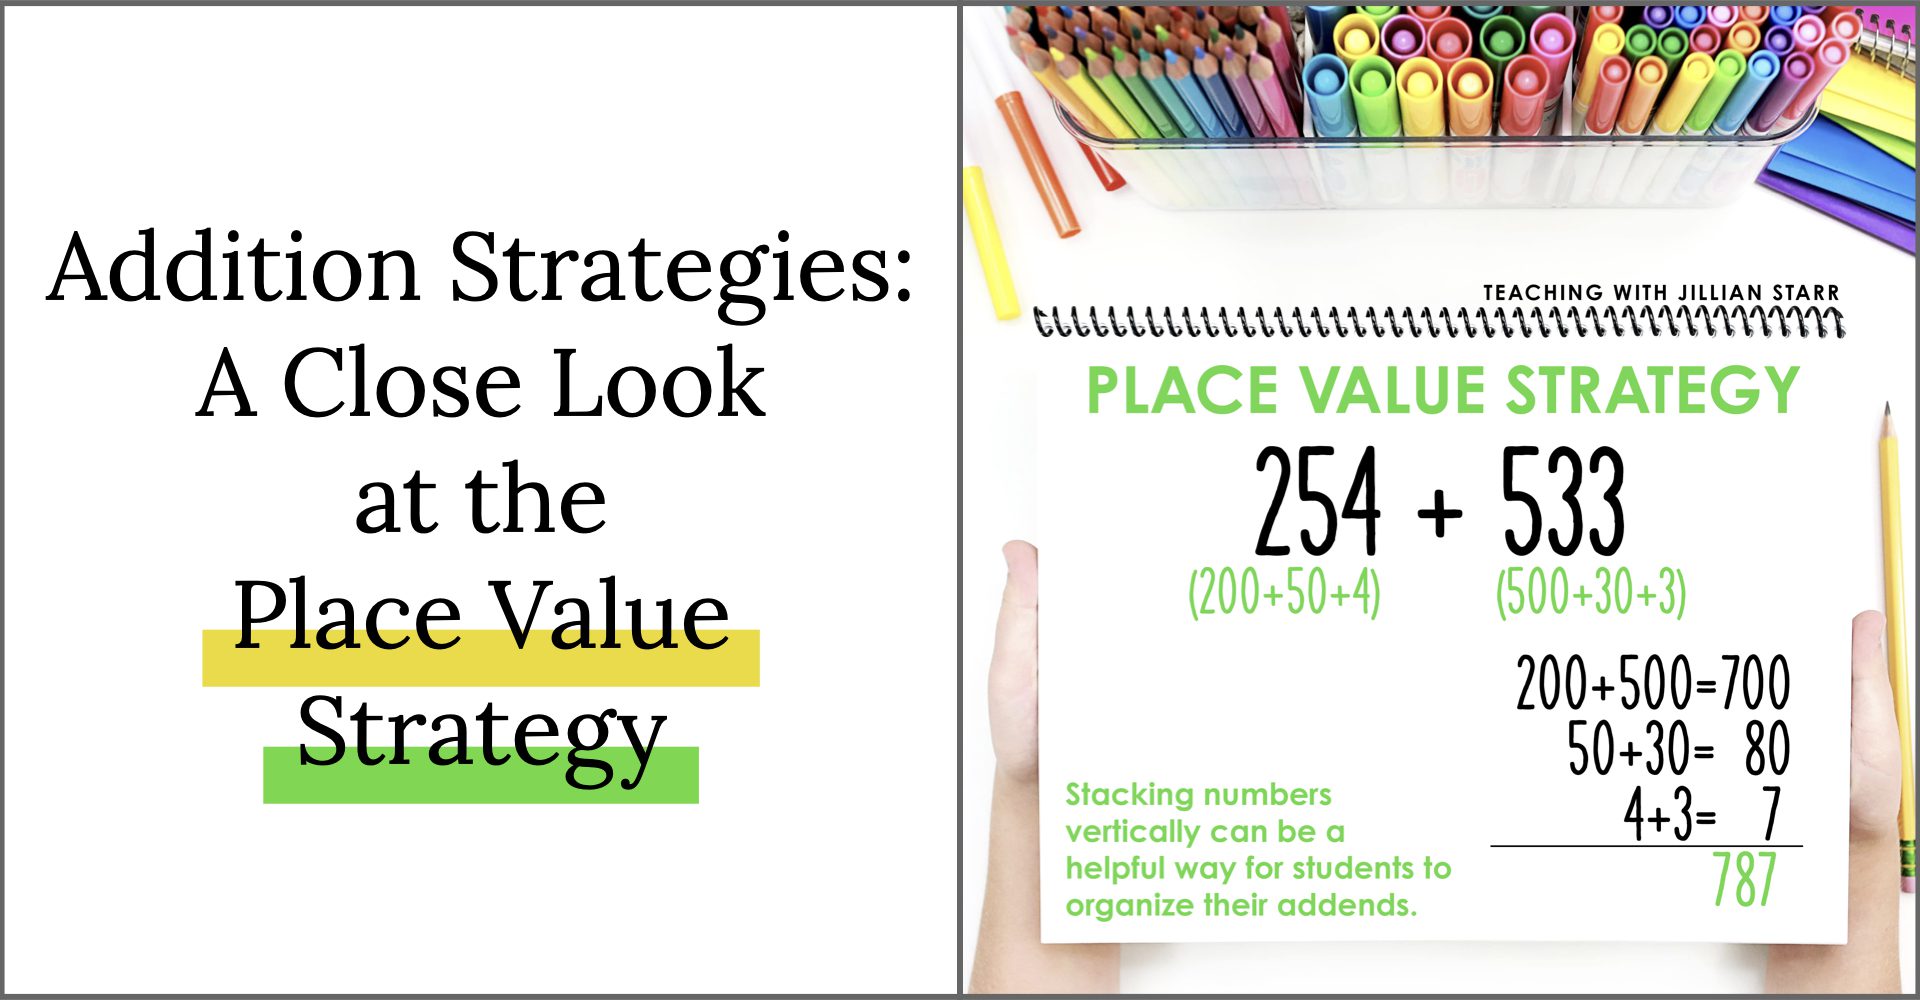 Place value strategy: Using expanded form of place values as an addition strategy